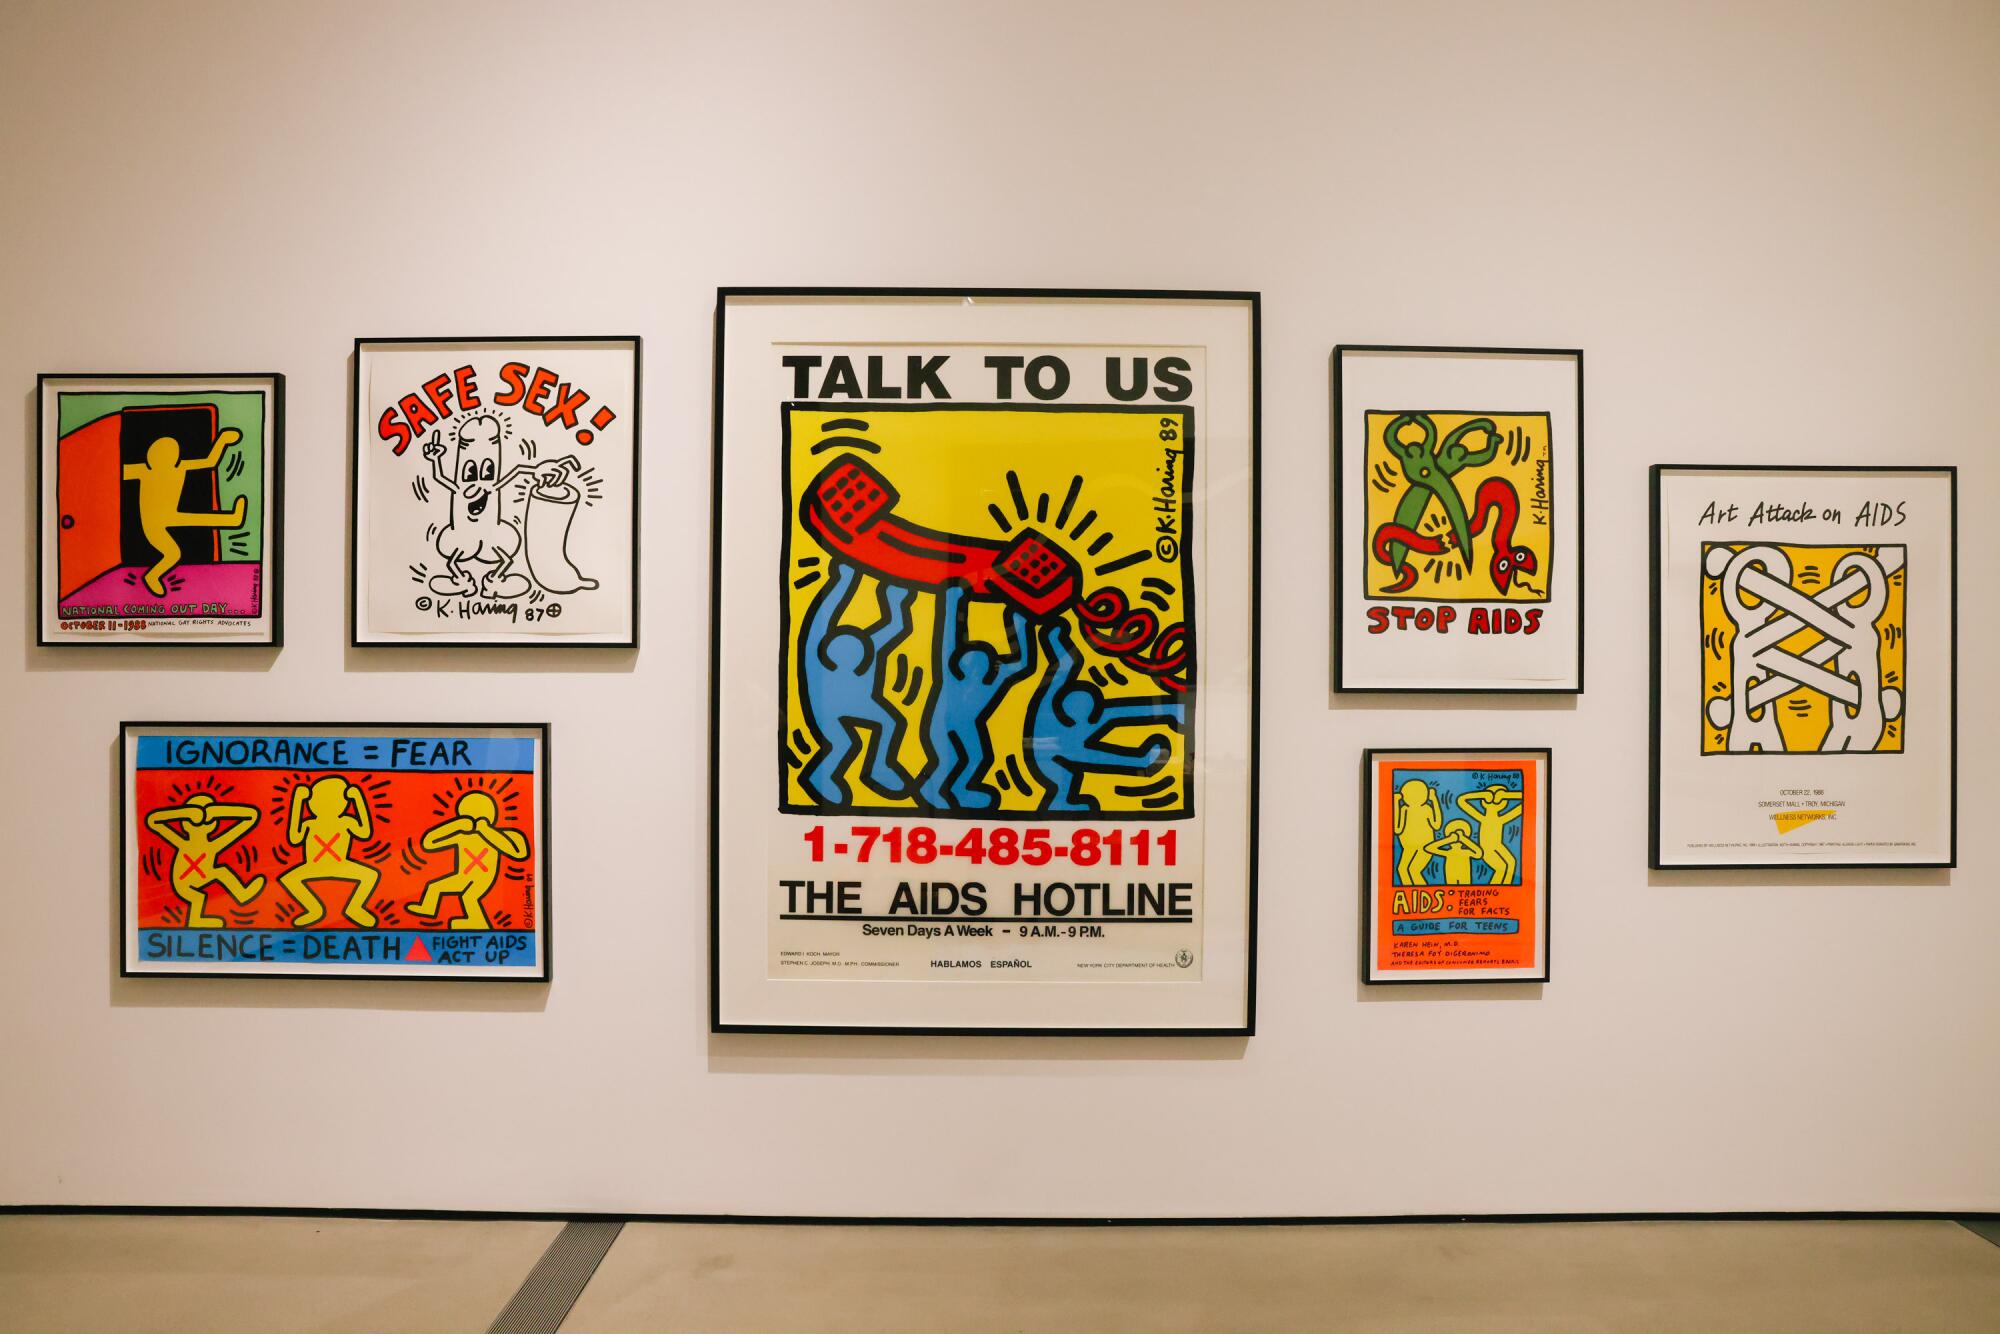 Keith Haring's posters.